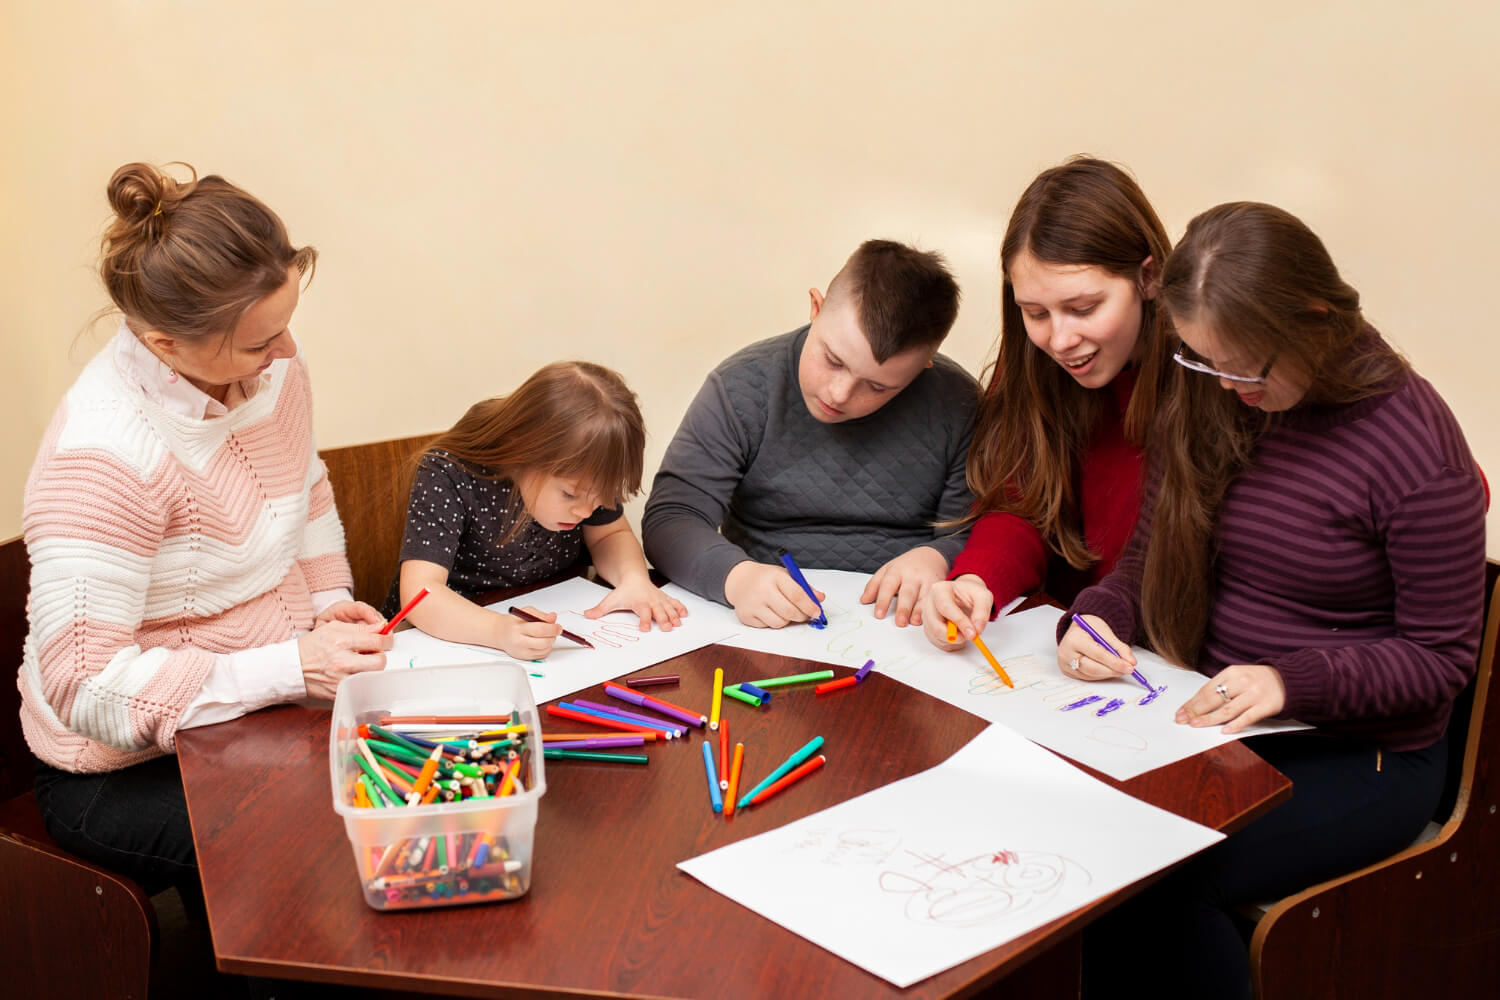 childrenStudent Engagement-with-down-syndrome-drawing-together (1)